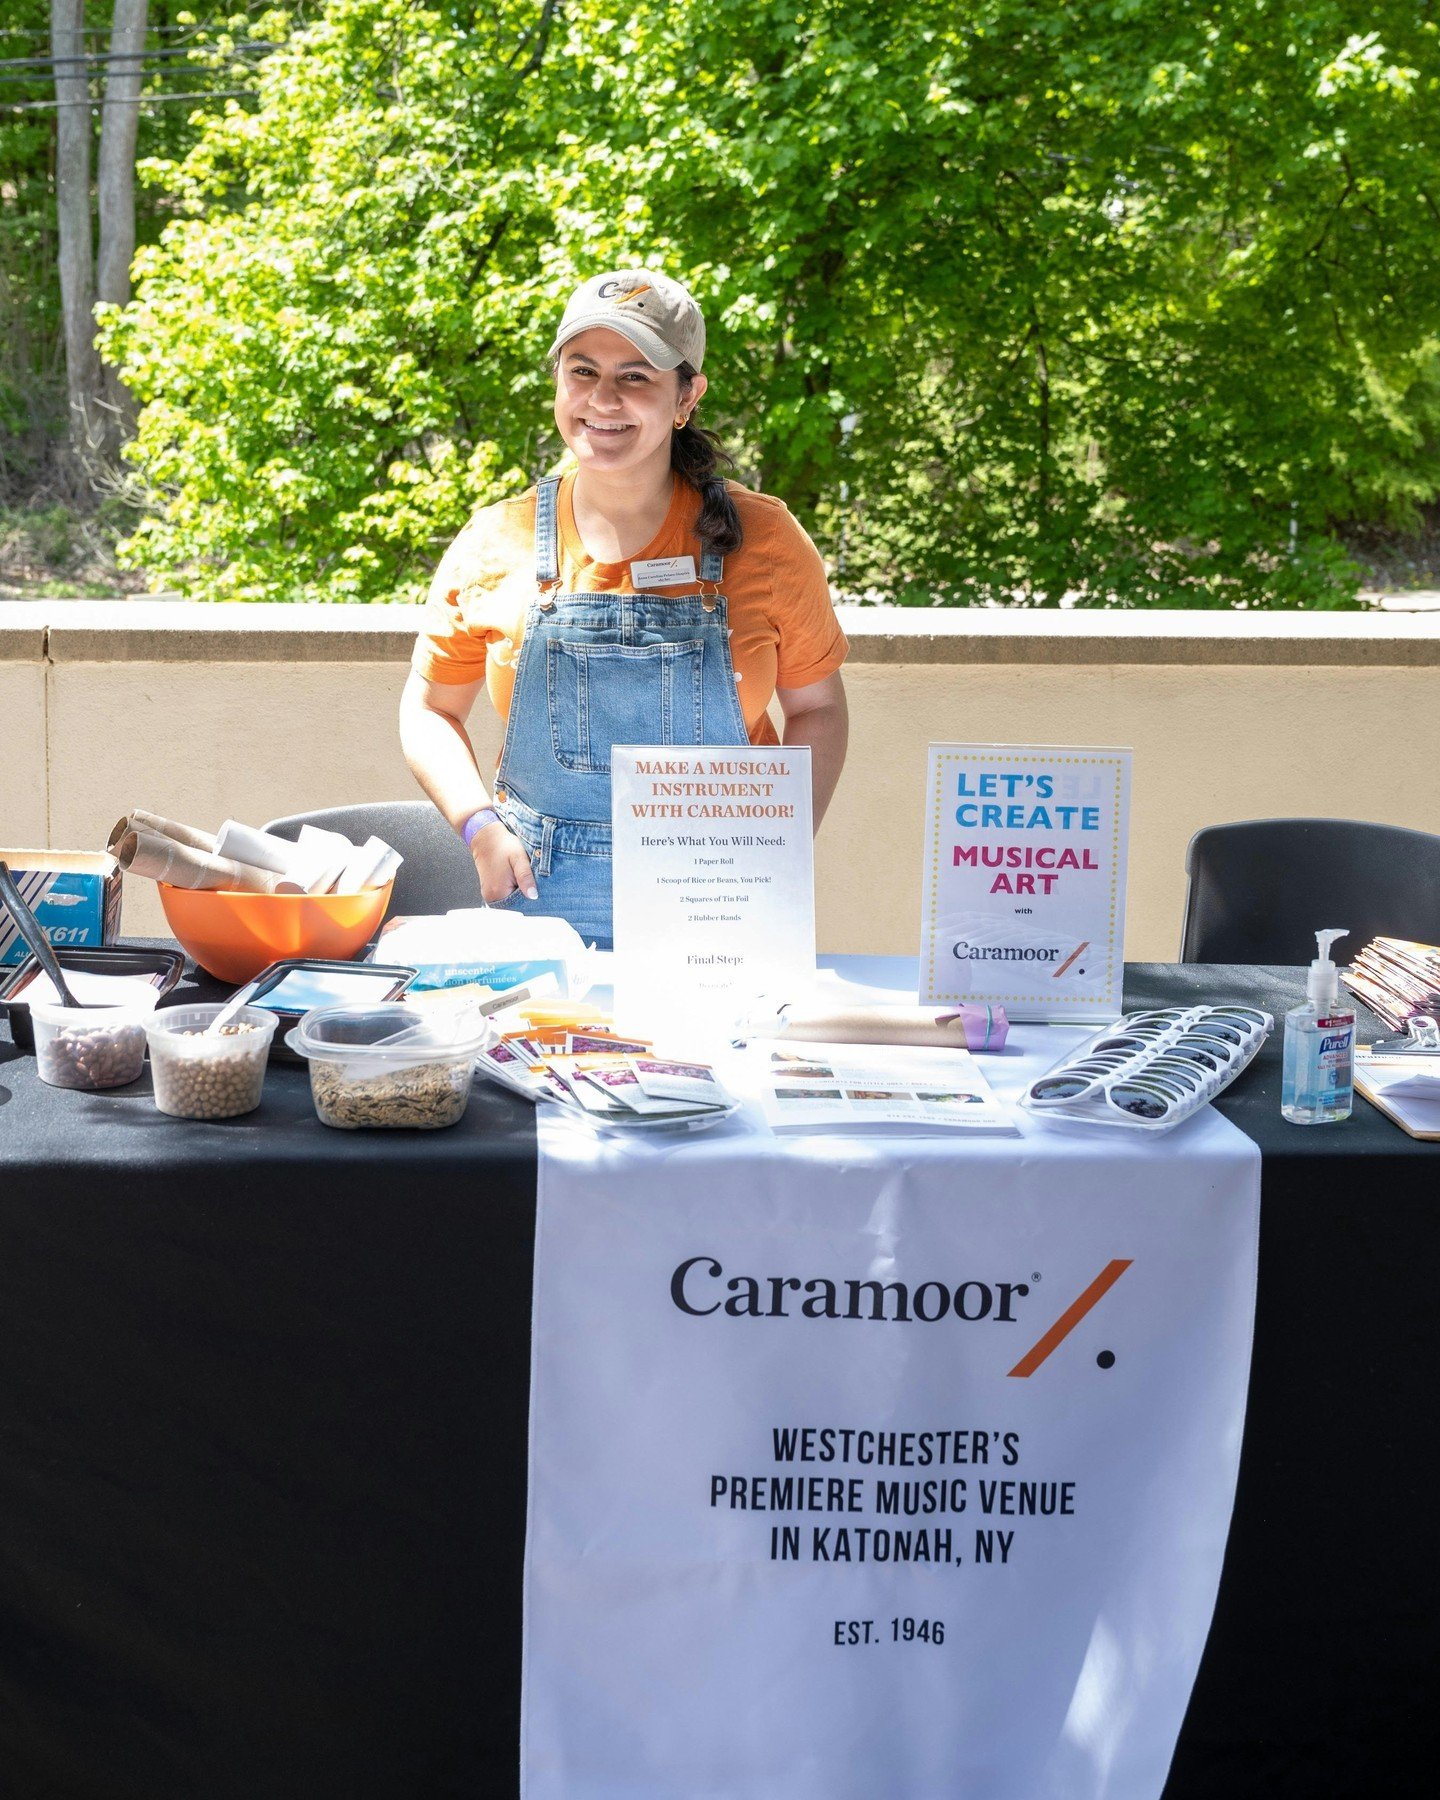 We have entertainment for the whole family, thanks to @caramoor and @nora_rothman joining us tomorrow 🕺 

Stop by Caramoor's tent for a &quot;Make-Your-Own-Instrument&quot; activity for the little ones from 9a-2p. 🎶 

Nora will be joining us from 1